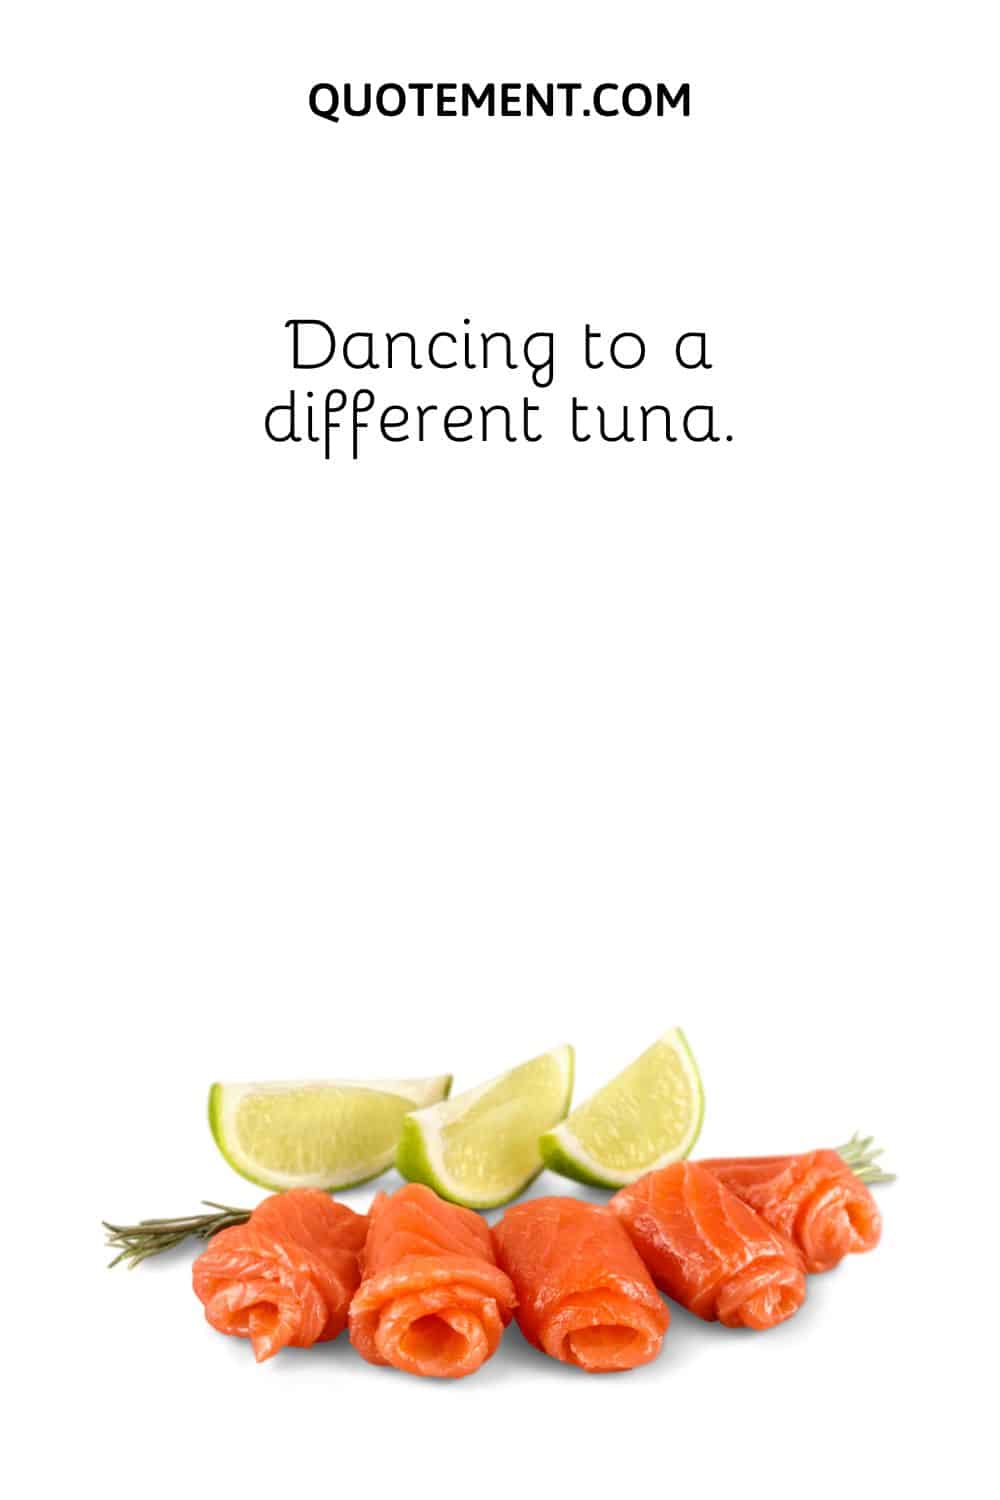 Dancing to a different tuna.